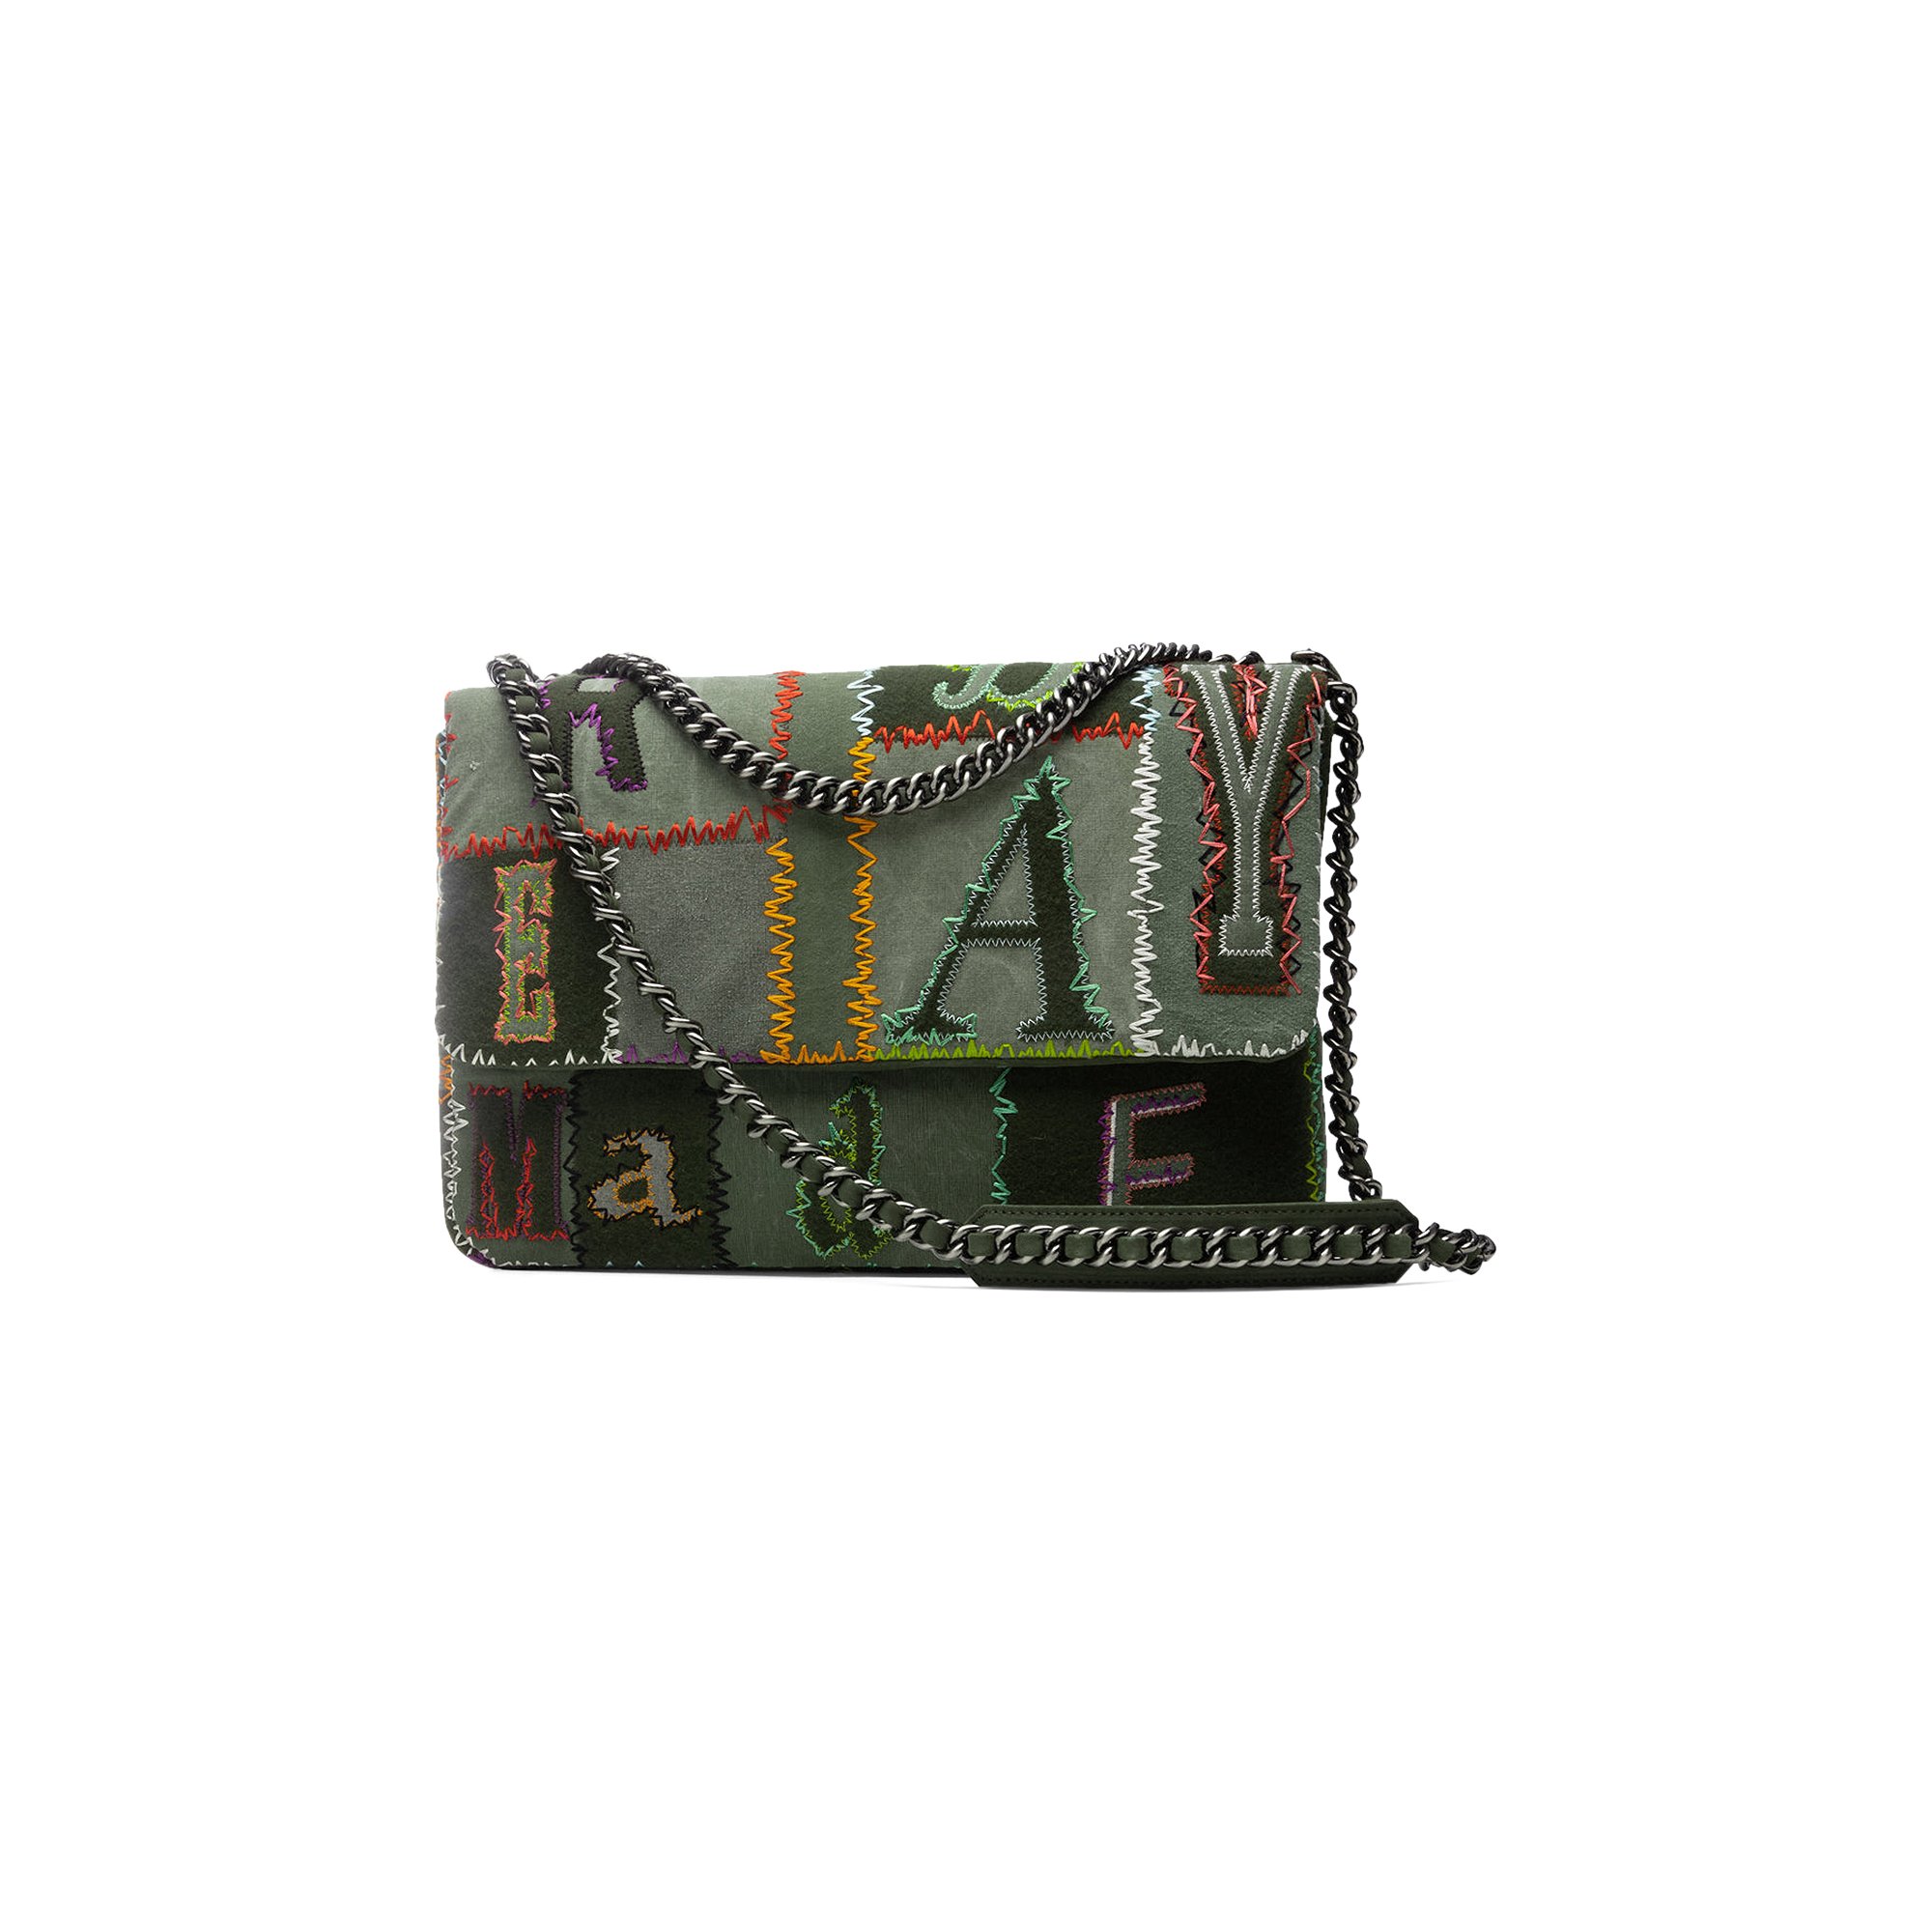 Buy READYMADE Patchwork Big Chain Bag 'Green' - RE MX KH 00 00 176 ...